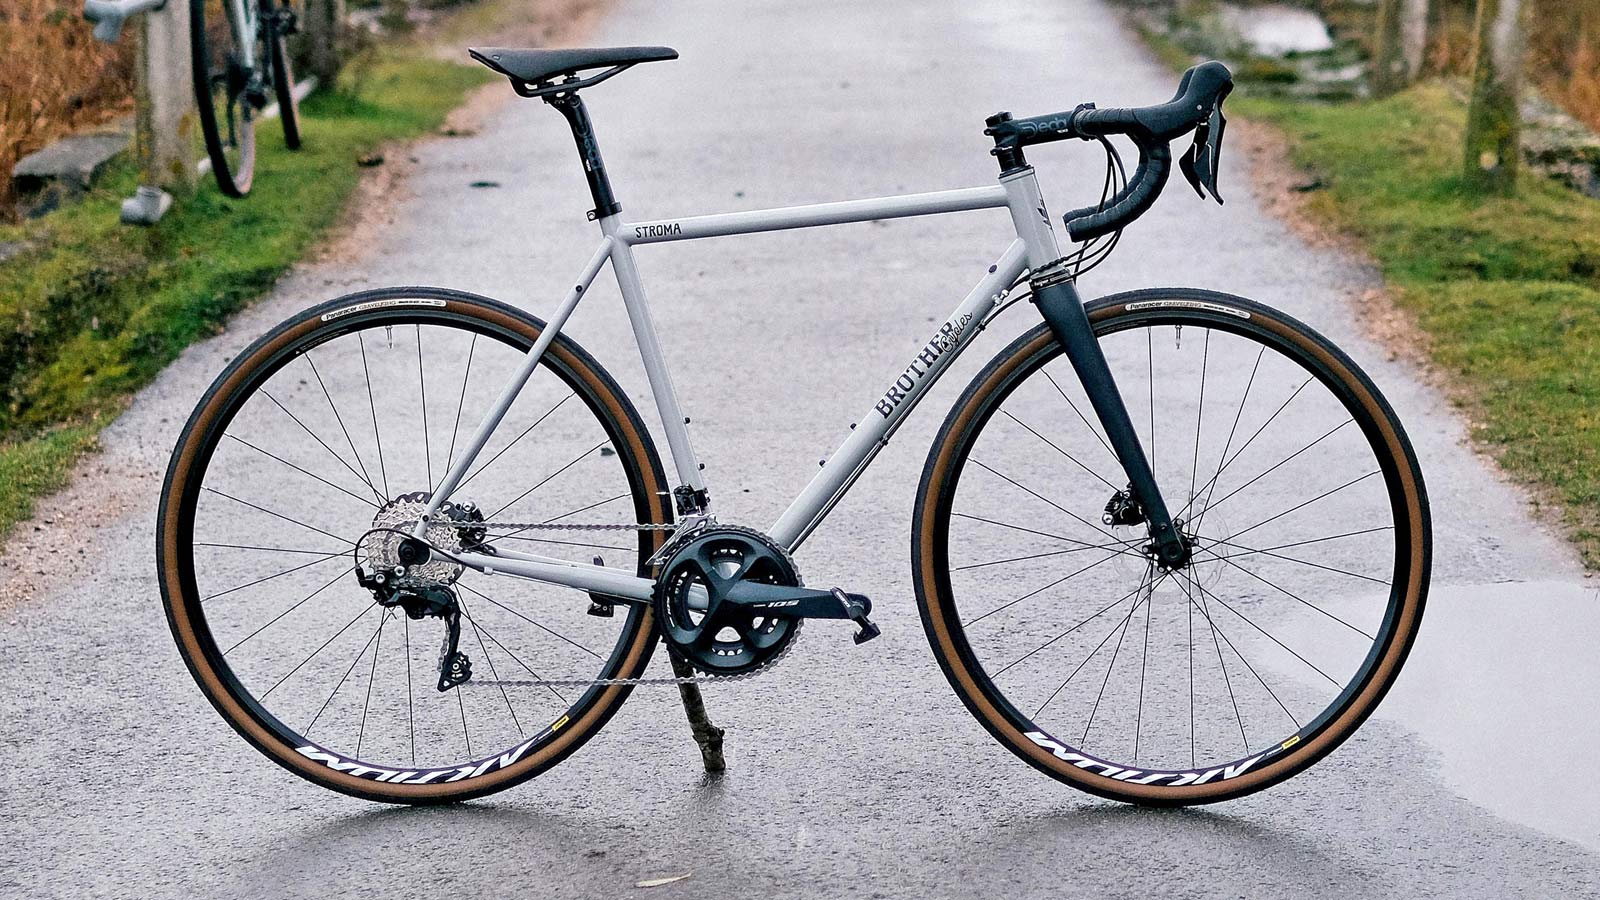 2020 Brother Cycles Stroma Reynolds 725 steel all-road bike